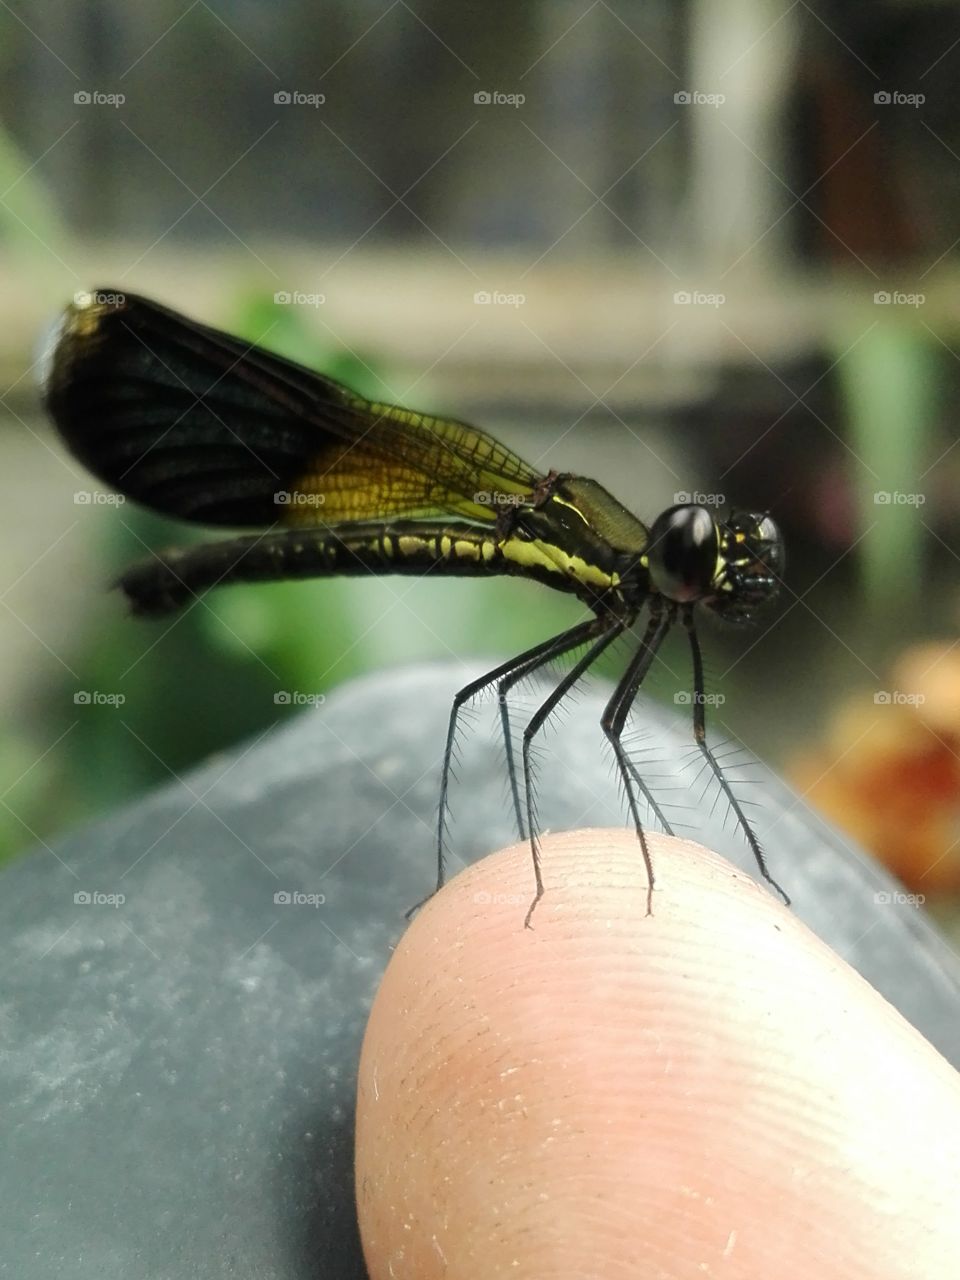 A dragonfly landed on my finger.